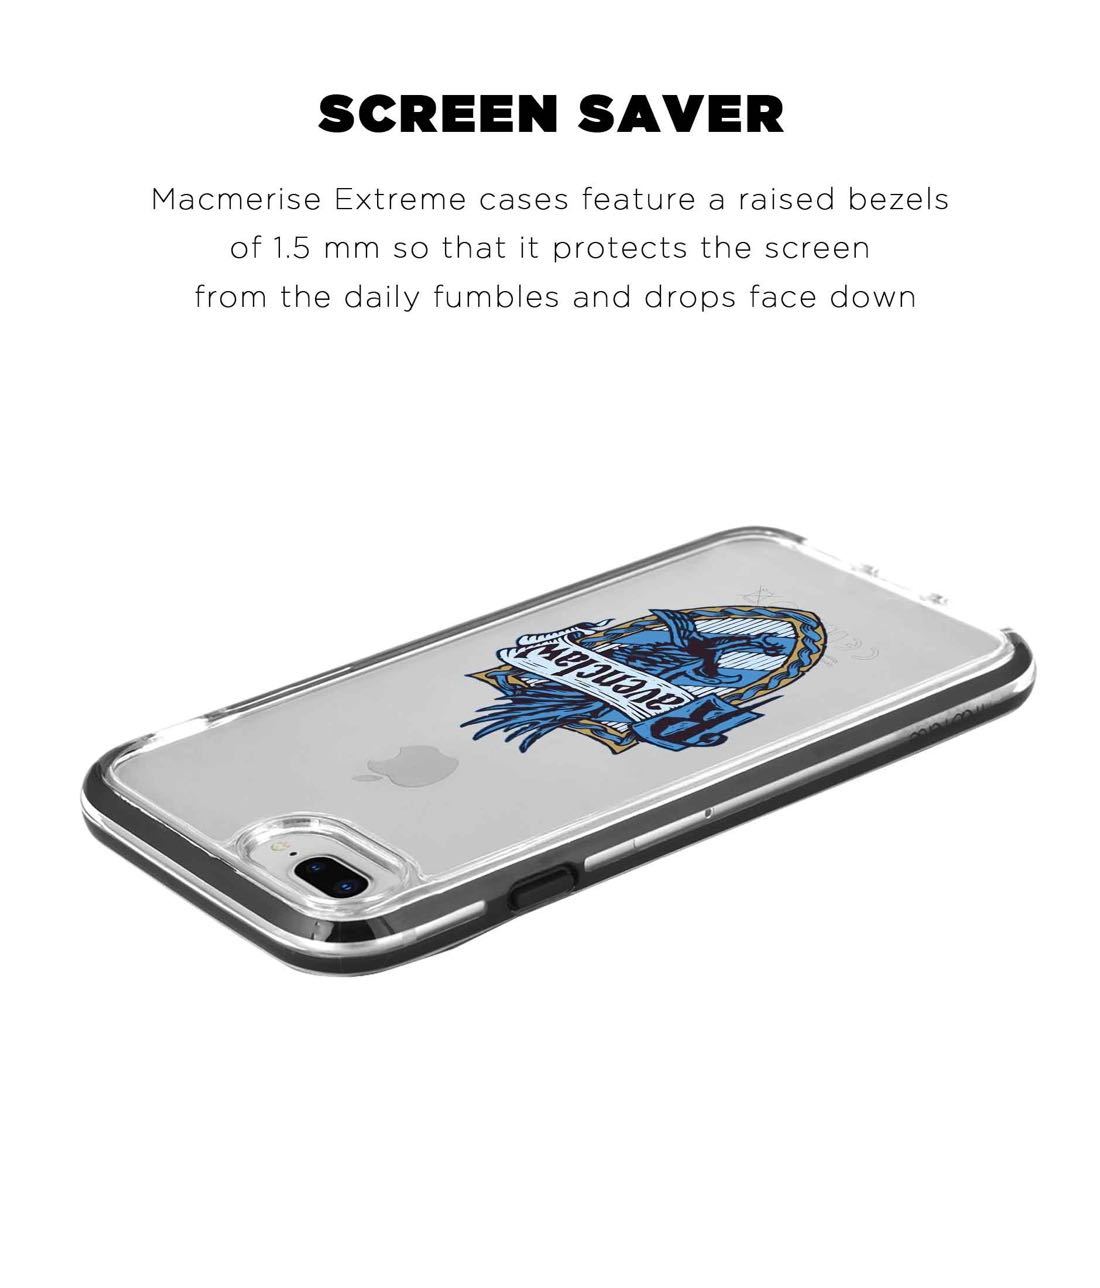 Crest Ravenclaw - Extreme Phone Case for iPhone 8 Plus